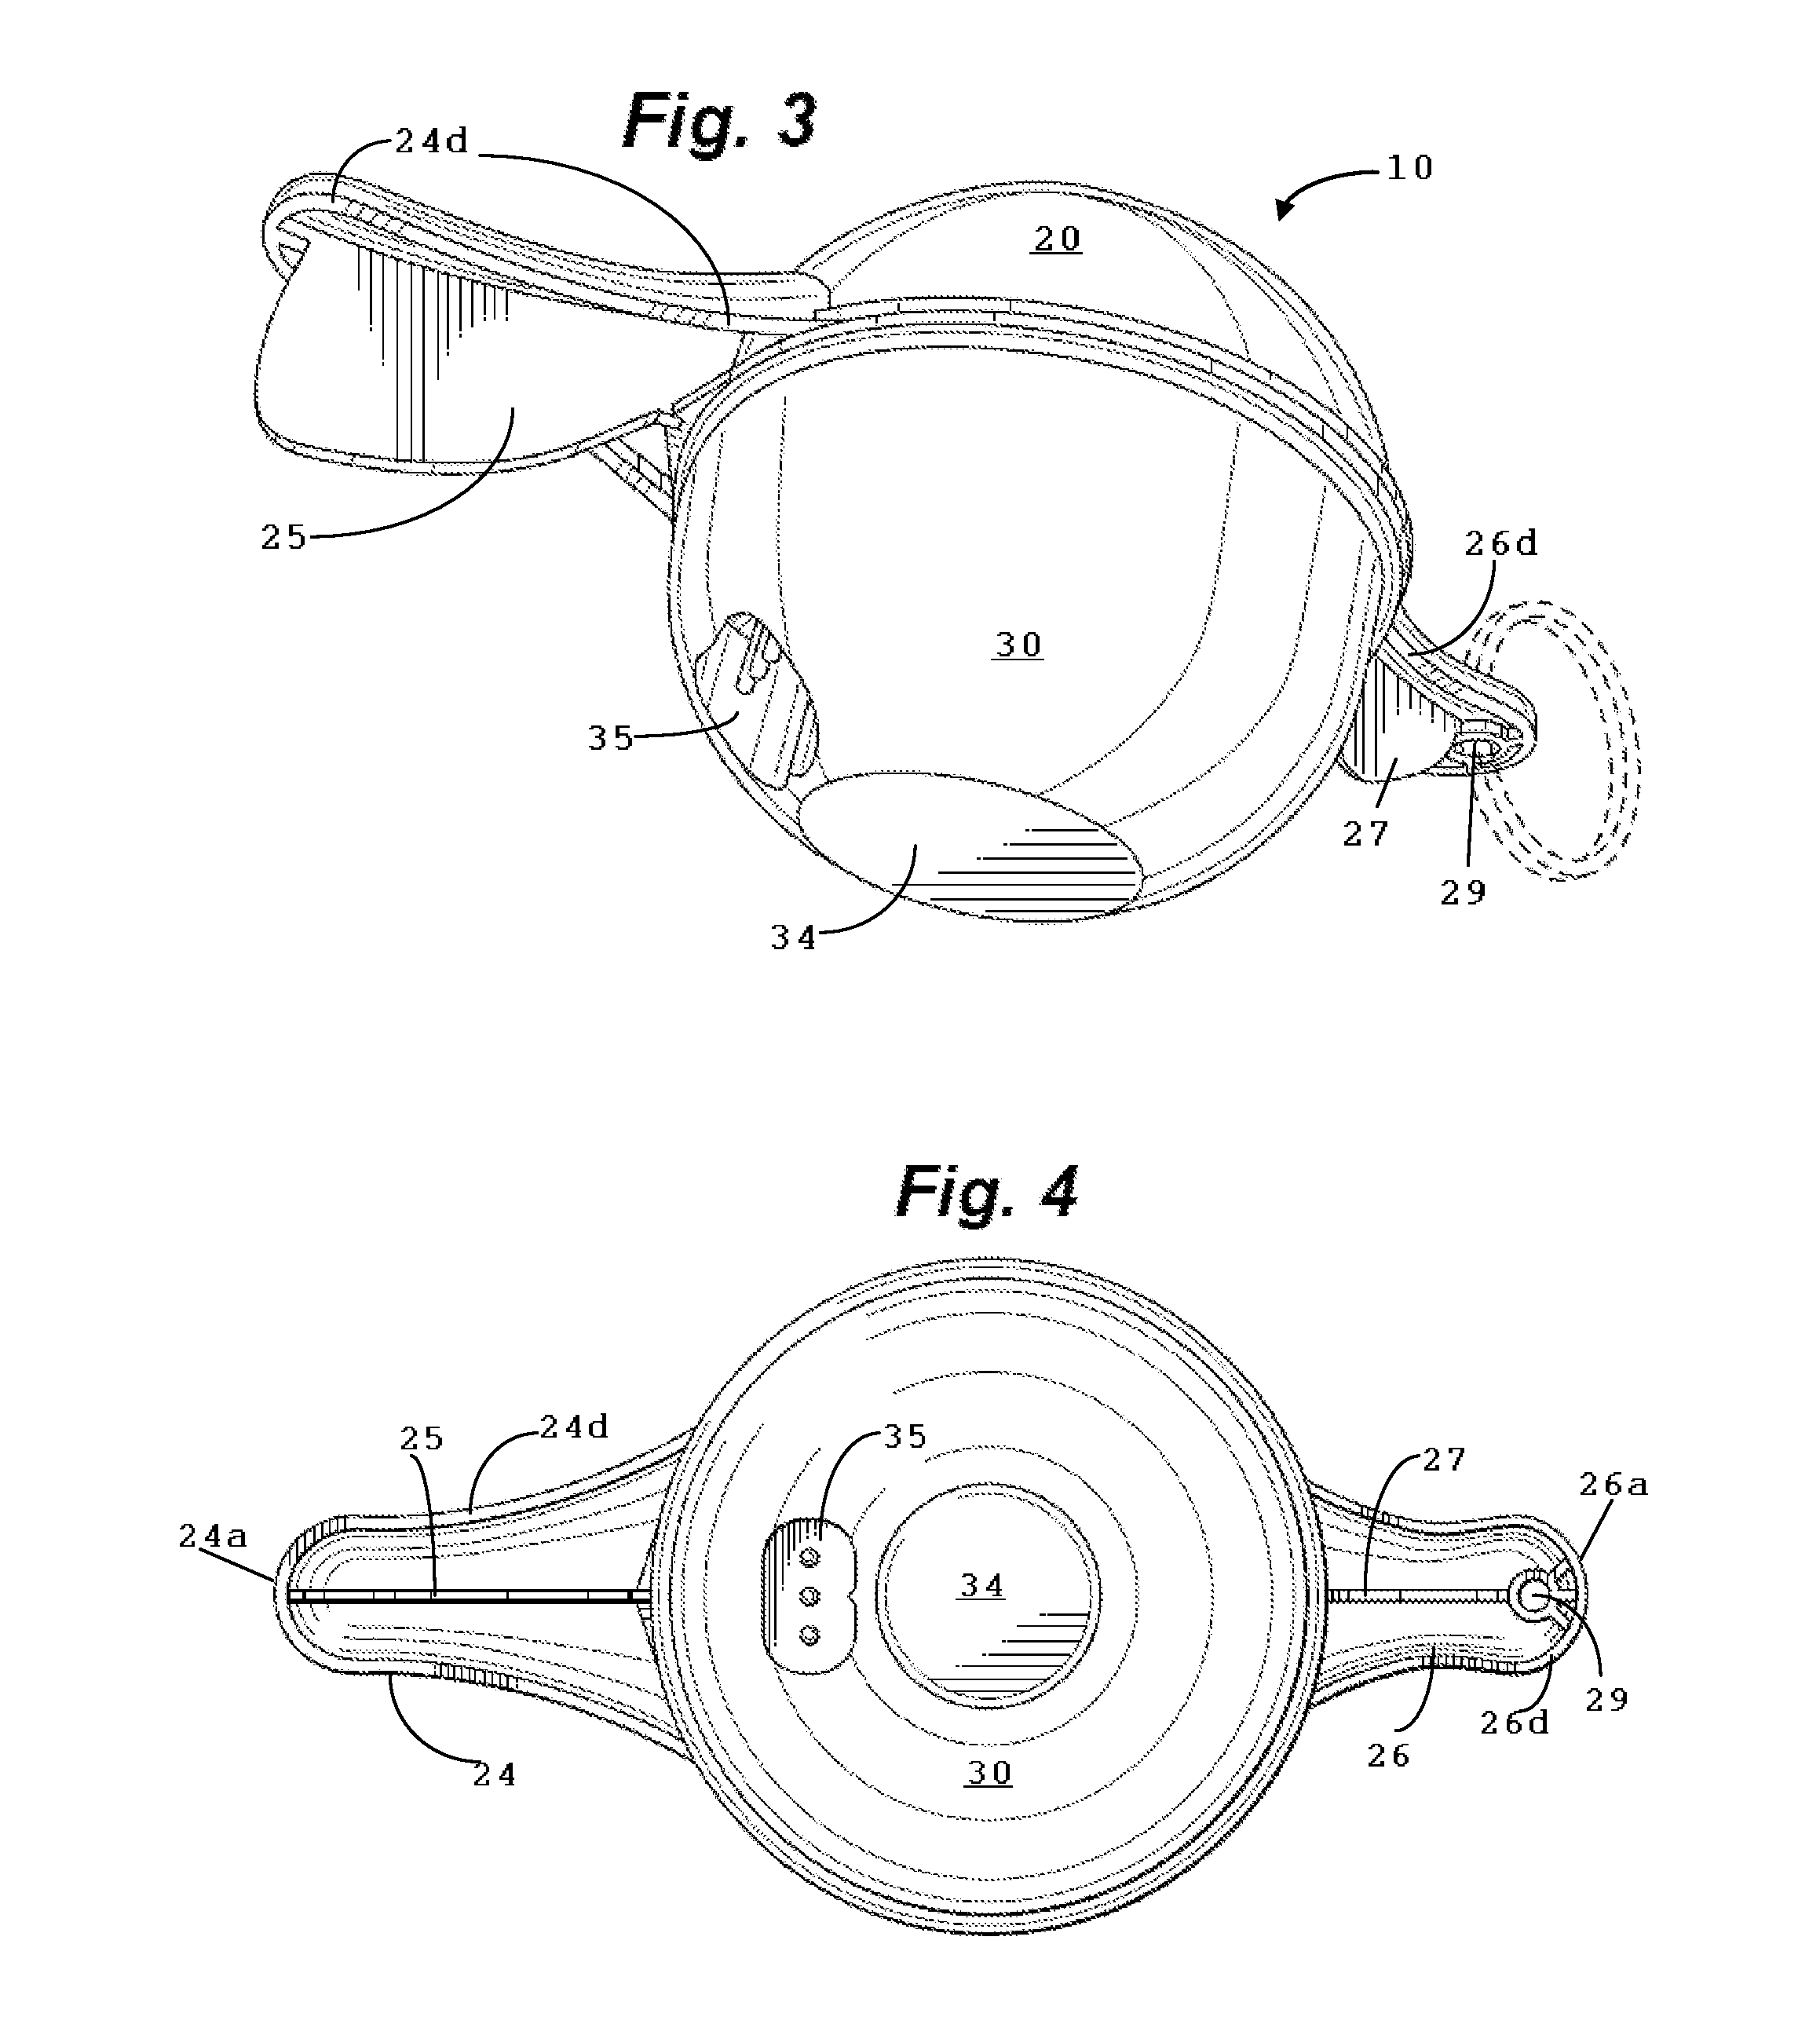 Fish finder device housing and system